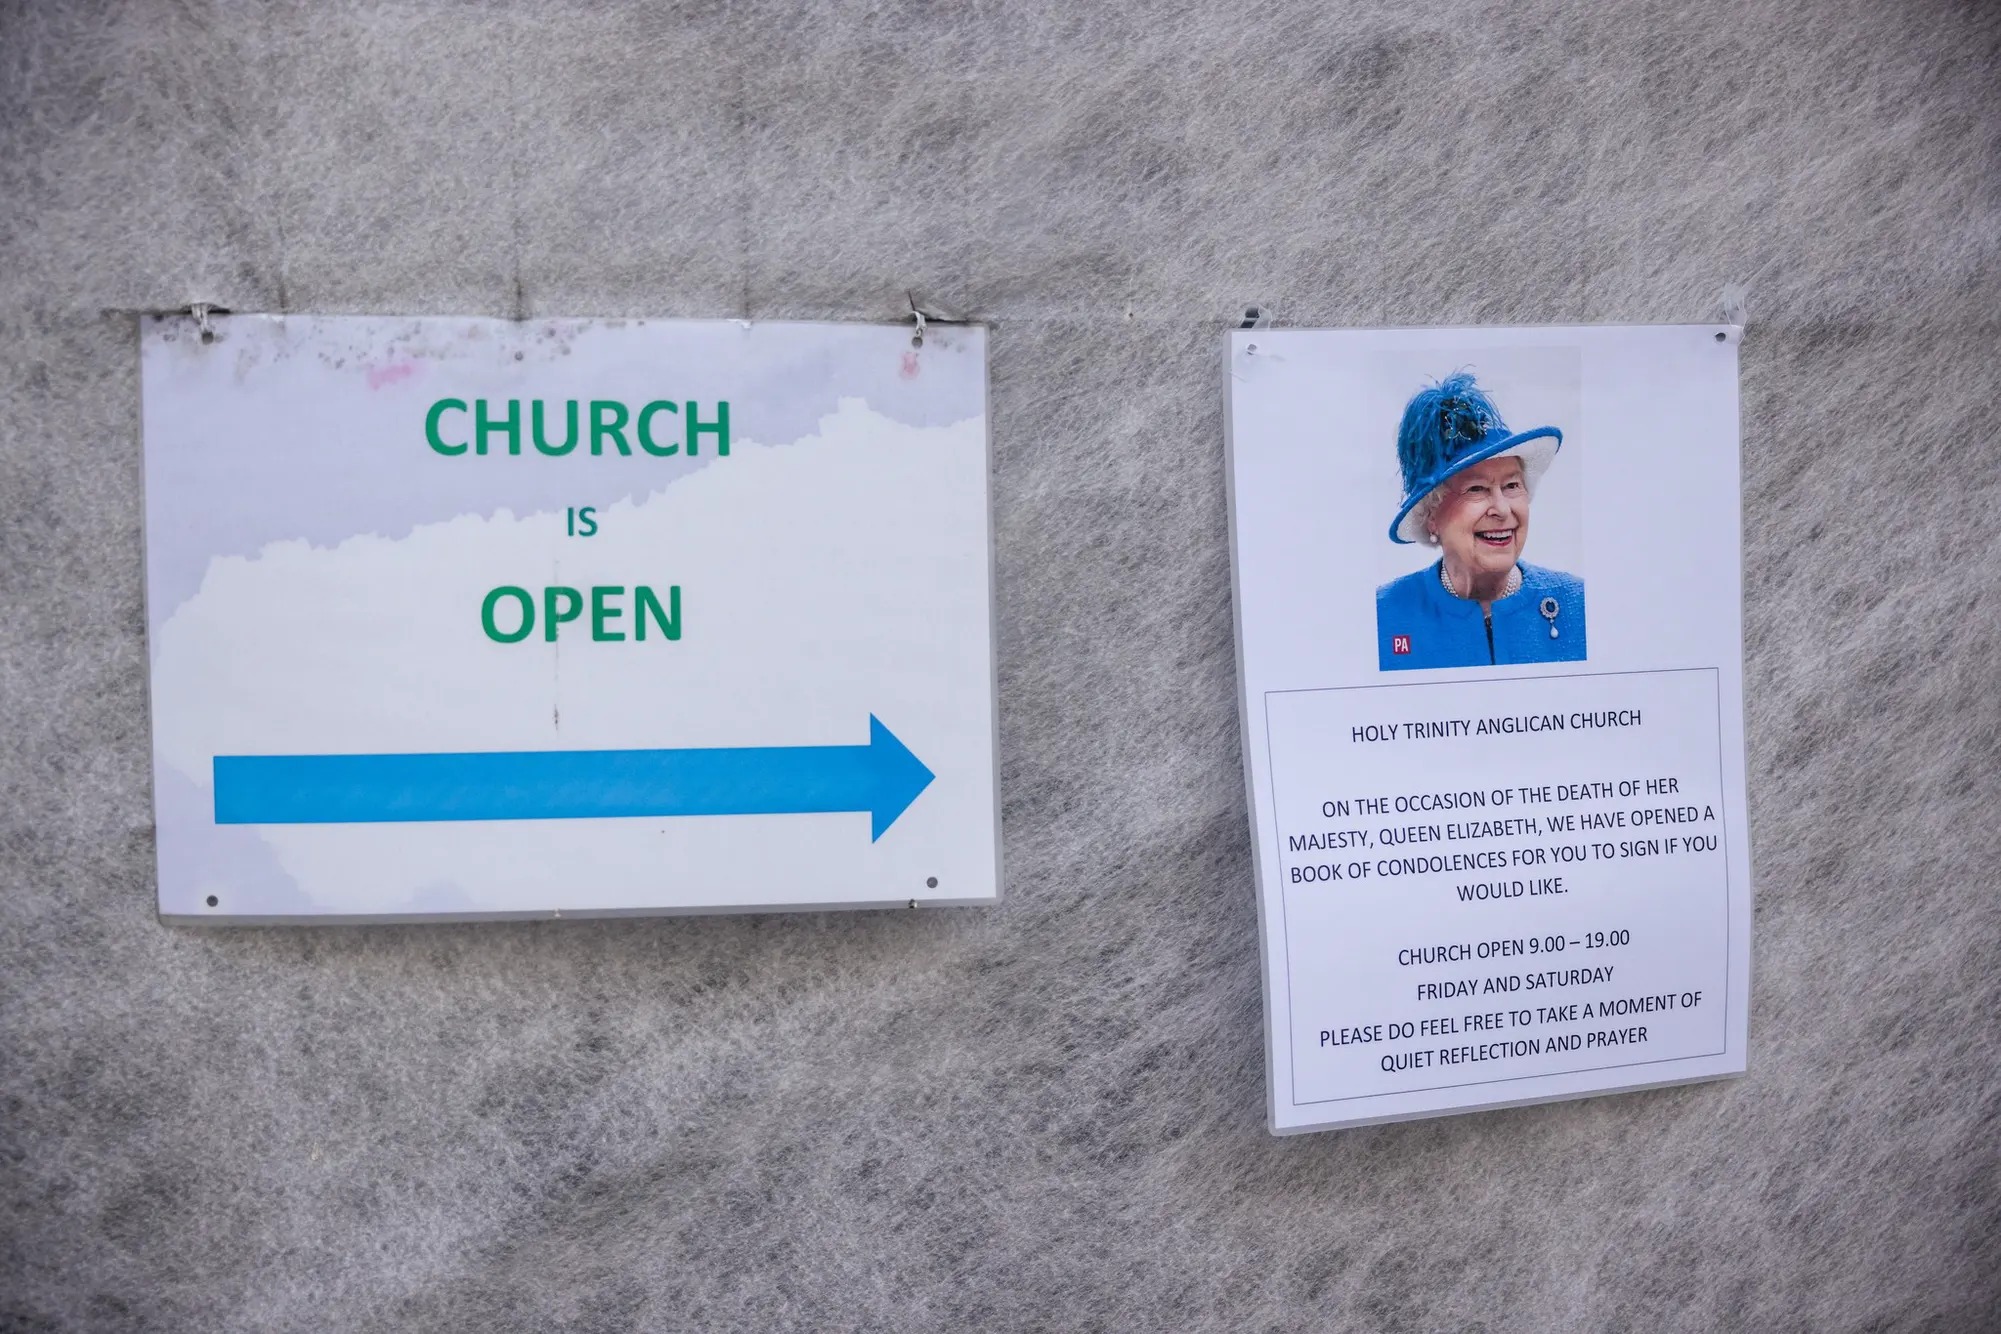 A sign stating the church is still open despite the queens passing.